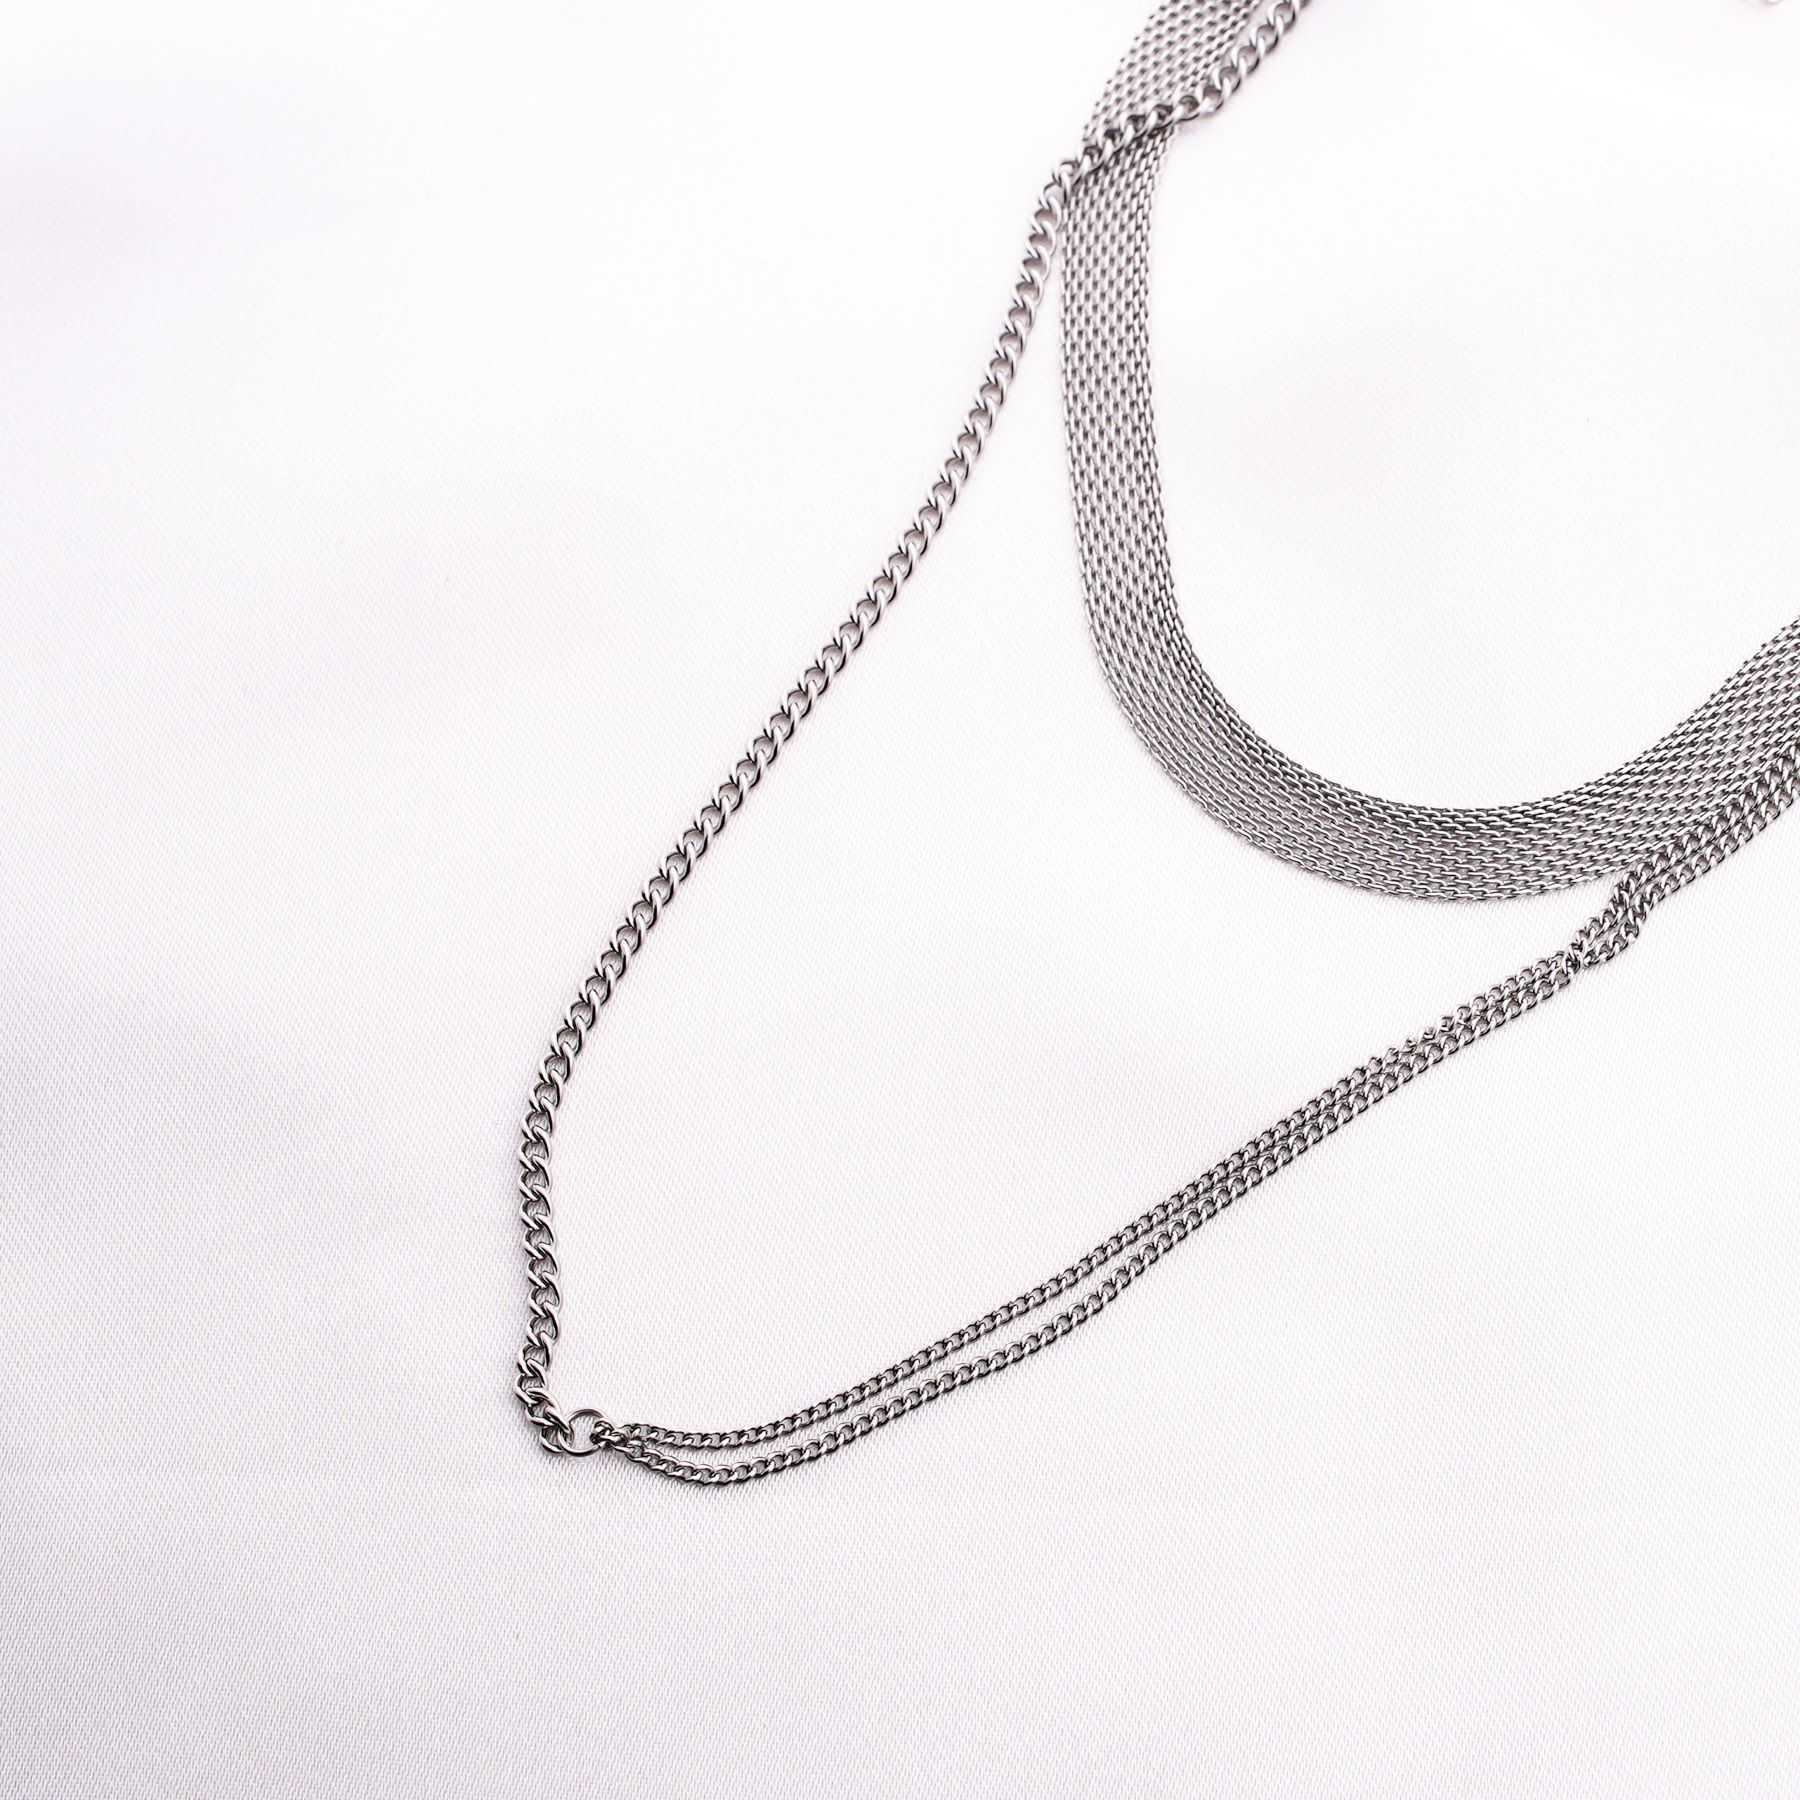 LEGACY CHOKER & DOUBLE NECKLACE - SILVER